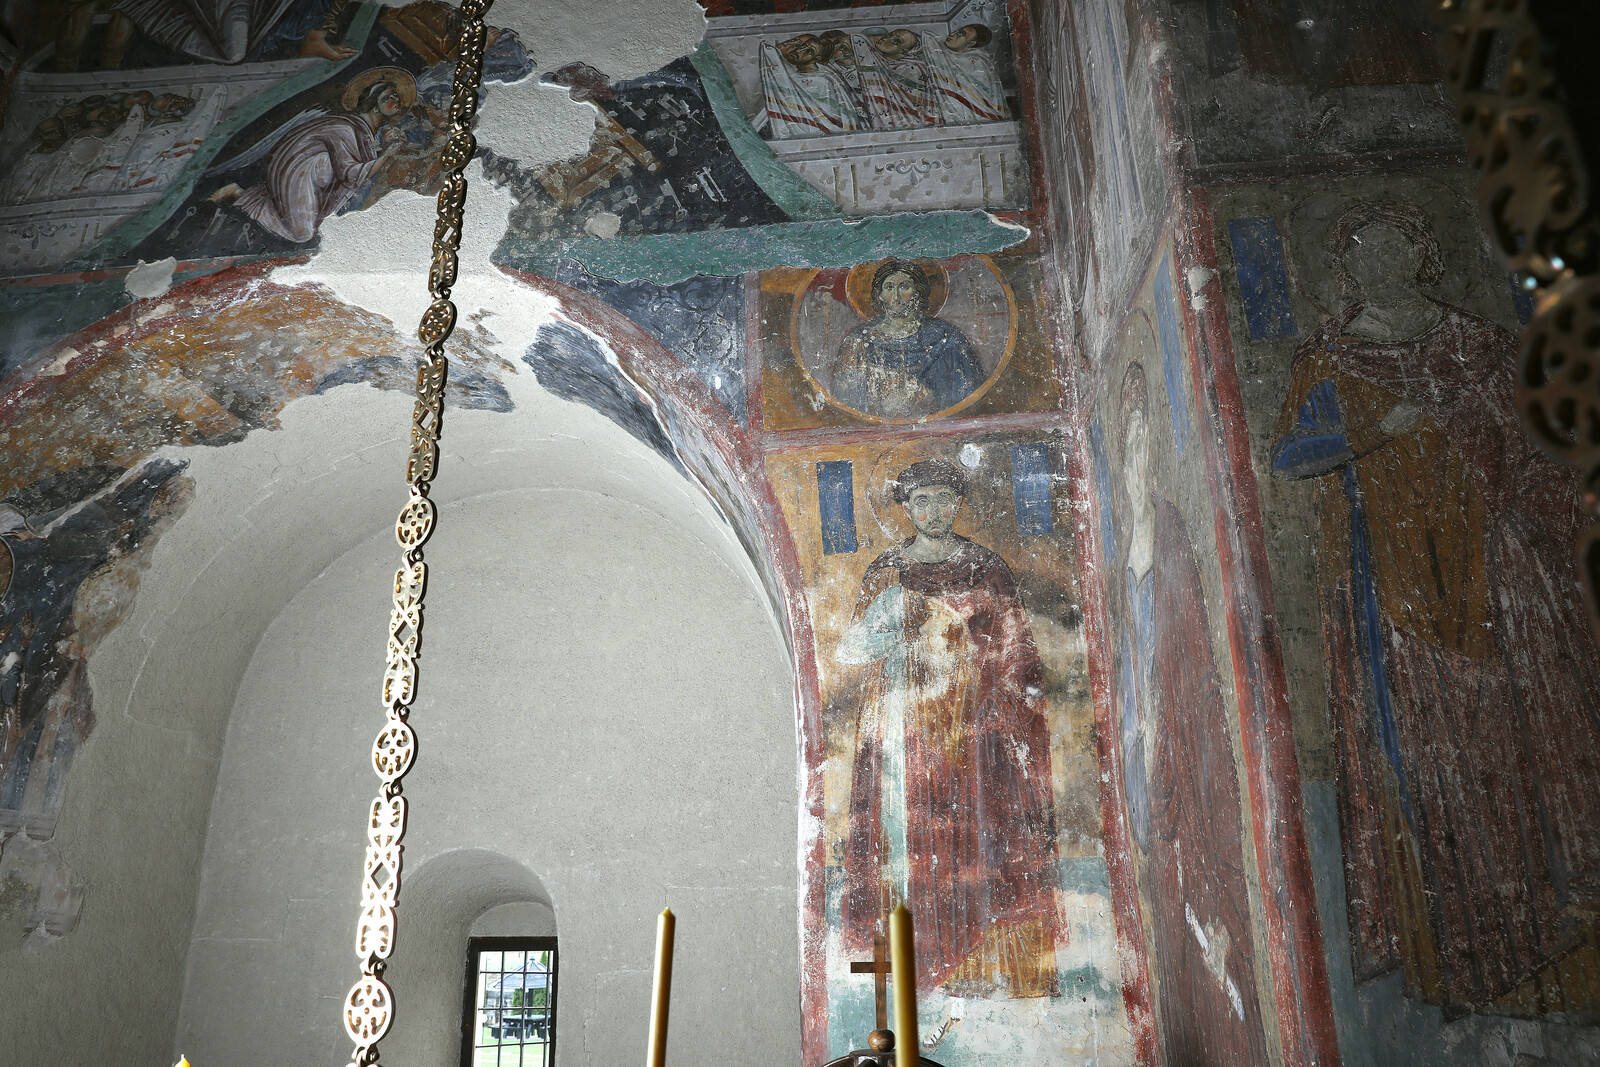 View of the southern wall of area under the dome